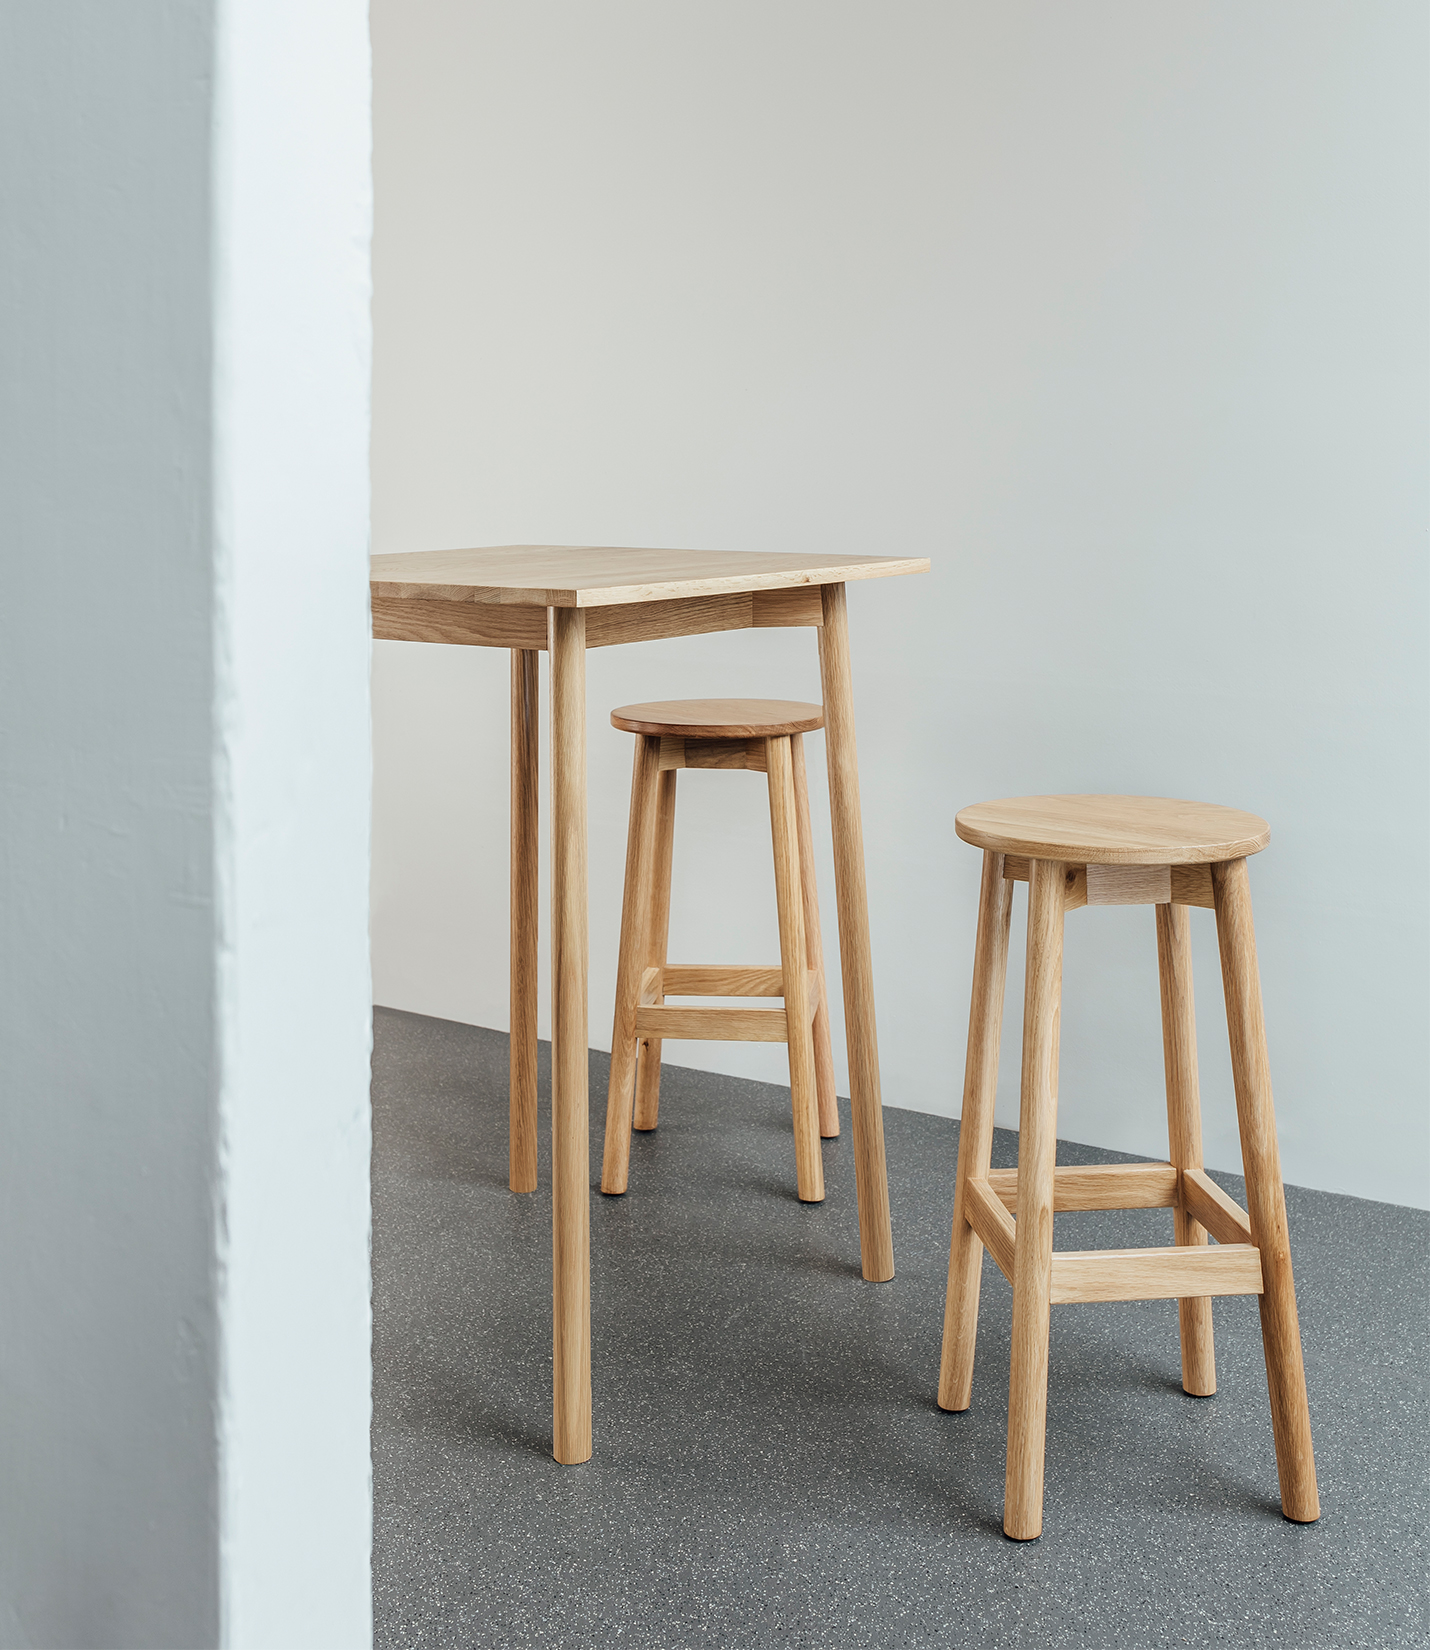 Fable High Stool